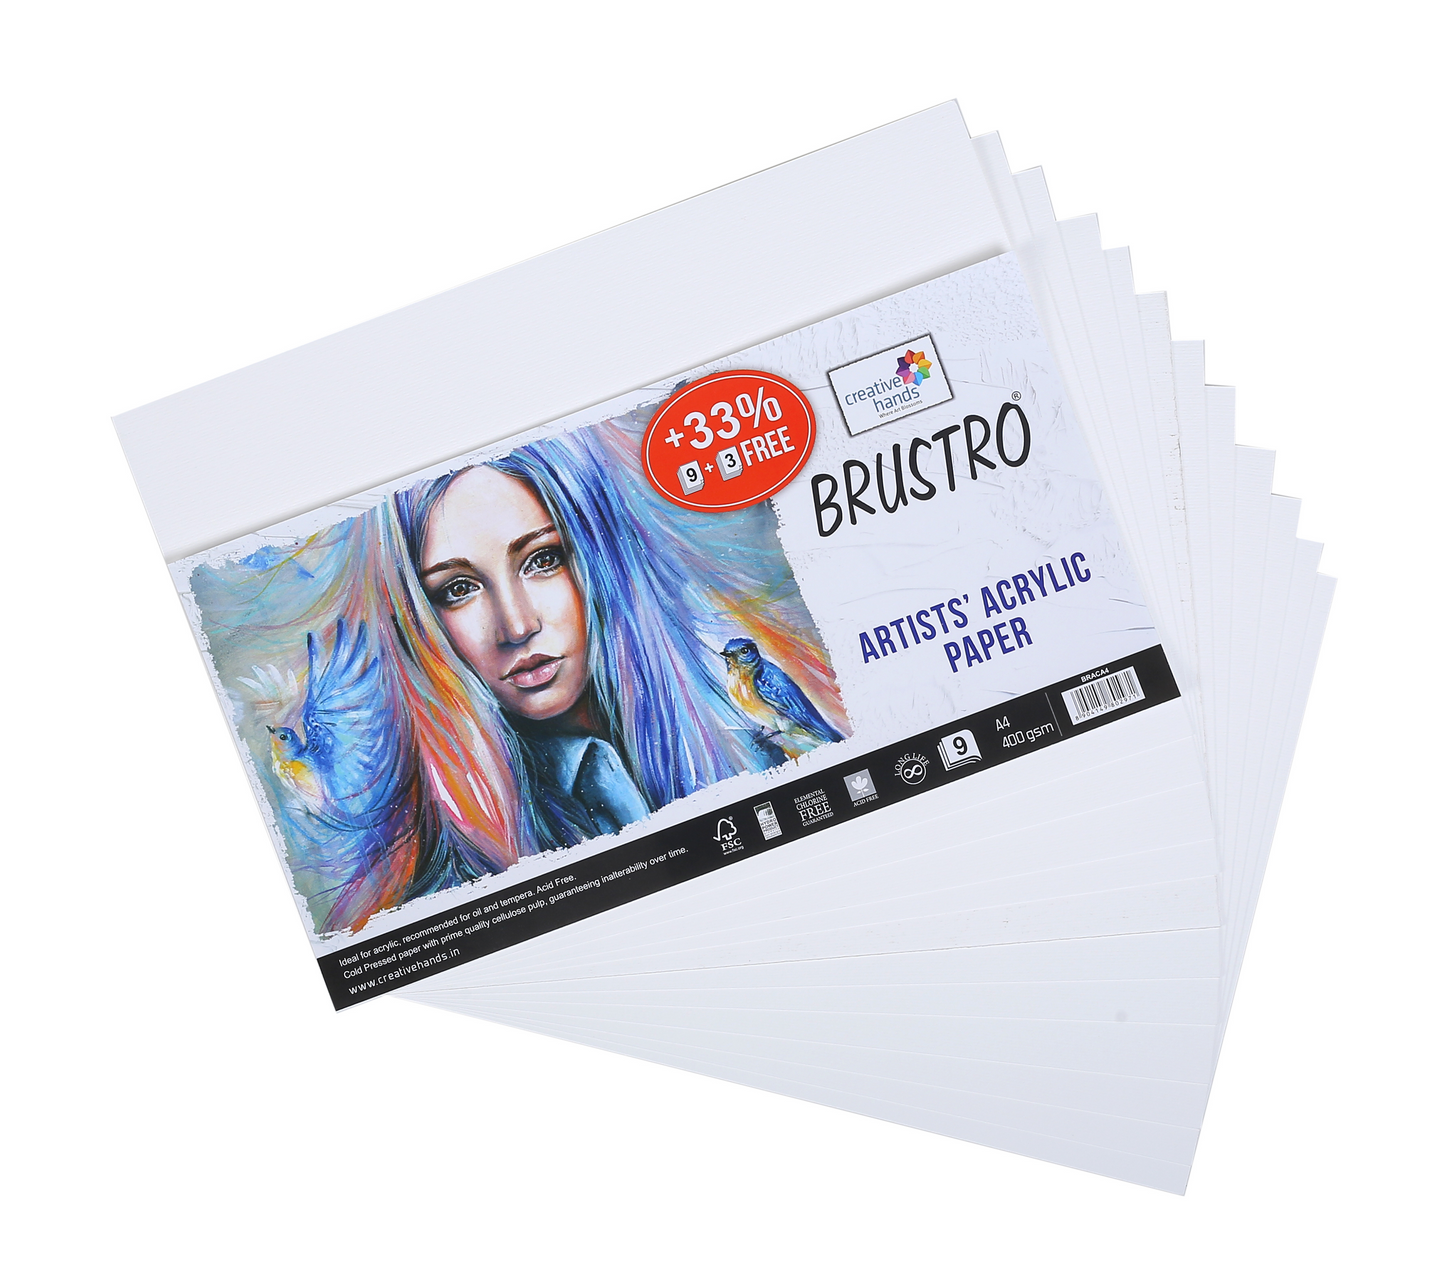 BRUSTRO Artists ’ Acrylic Pastel Colour Set of 12 Colours X 12ML Tubes with 400 GSM A4 Size Paper (Pack of 9 + 3 Free Sheets)